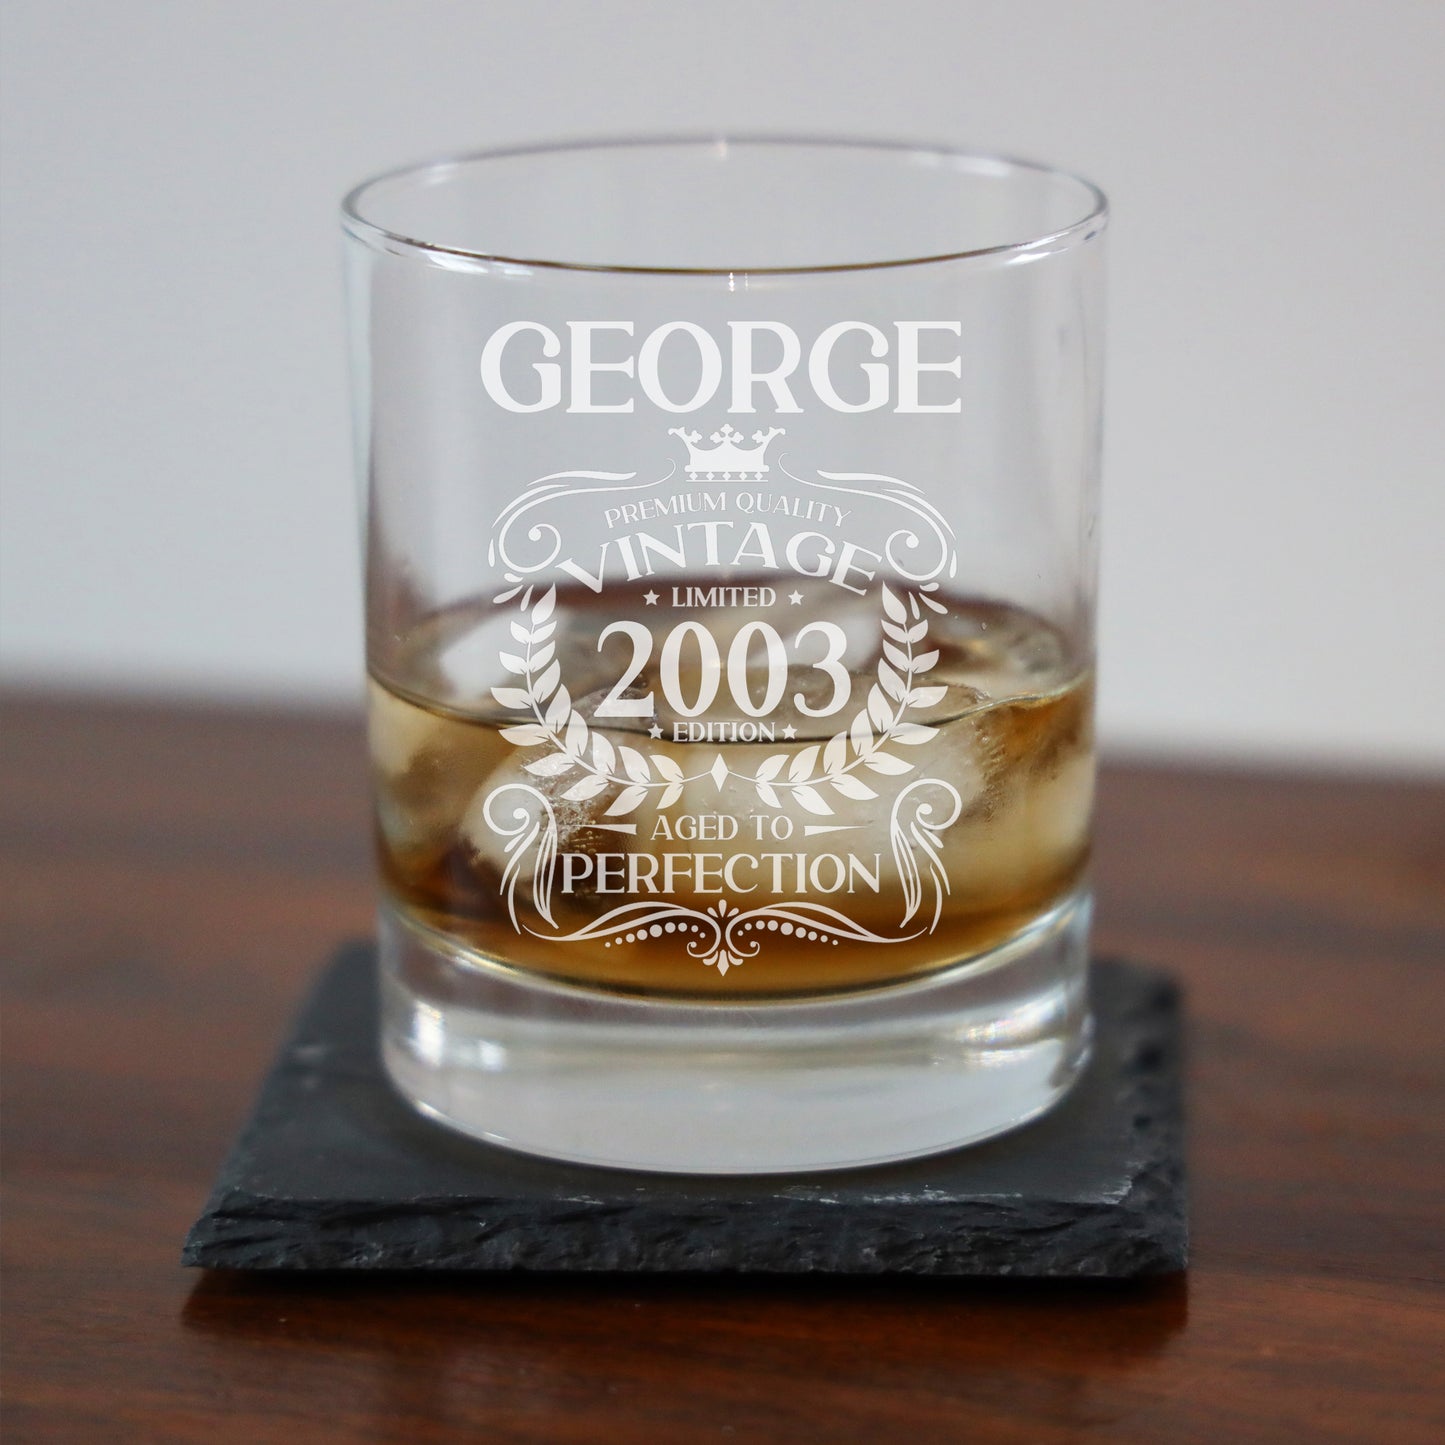 Vintage 2003 20th Birthday Engraved Whiskey Glass Gift  - Always Looking Good -   